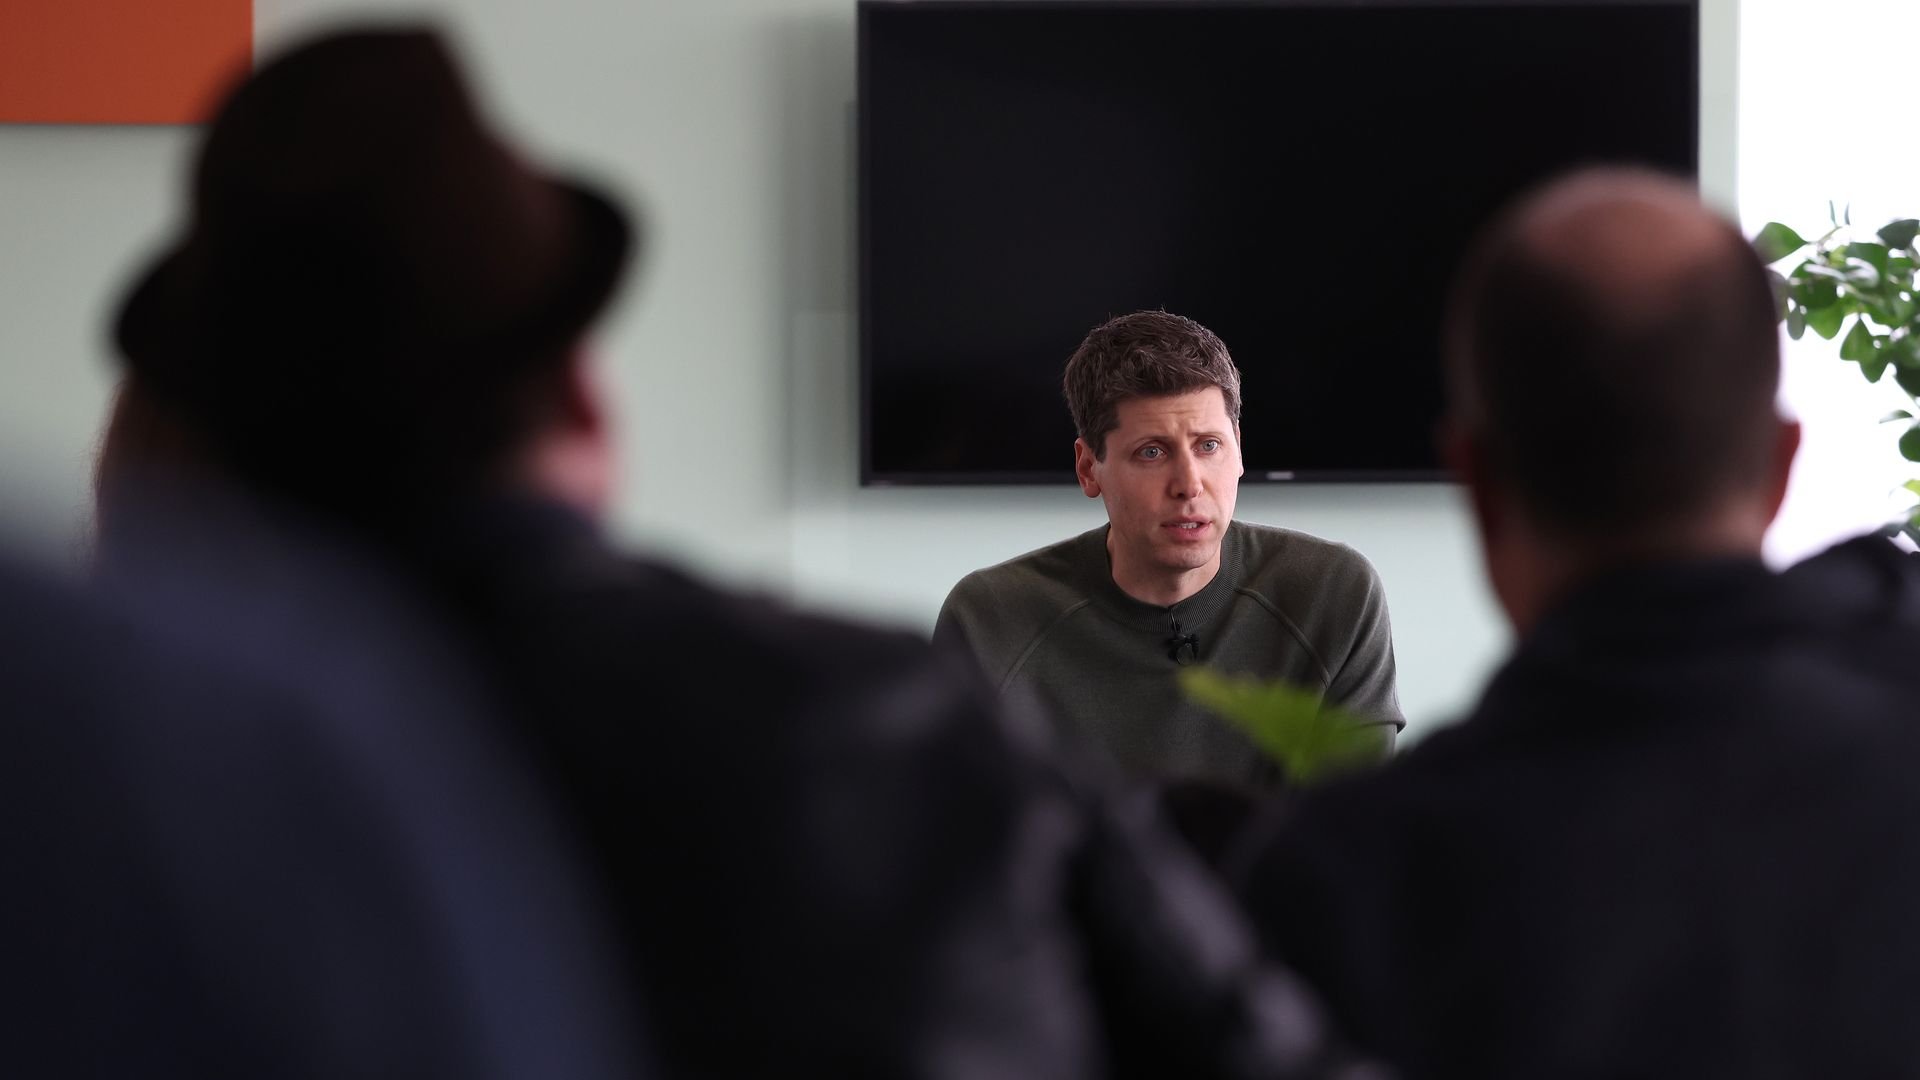 How Sam Altman's ouster went down, according to OpenAI's ex-president